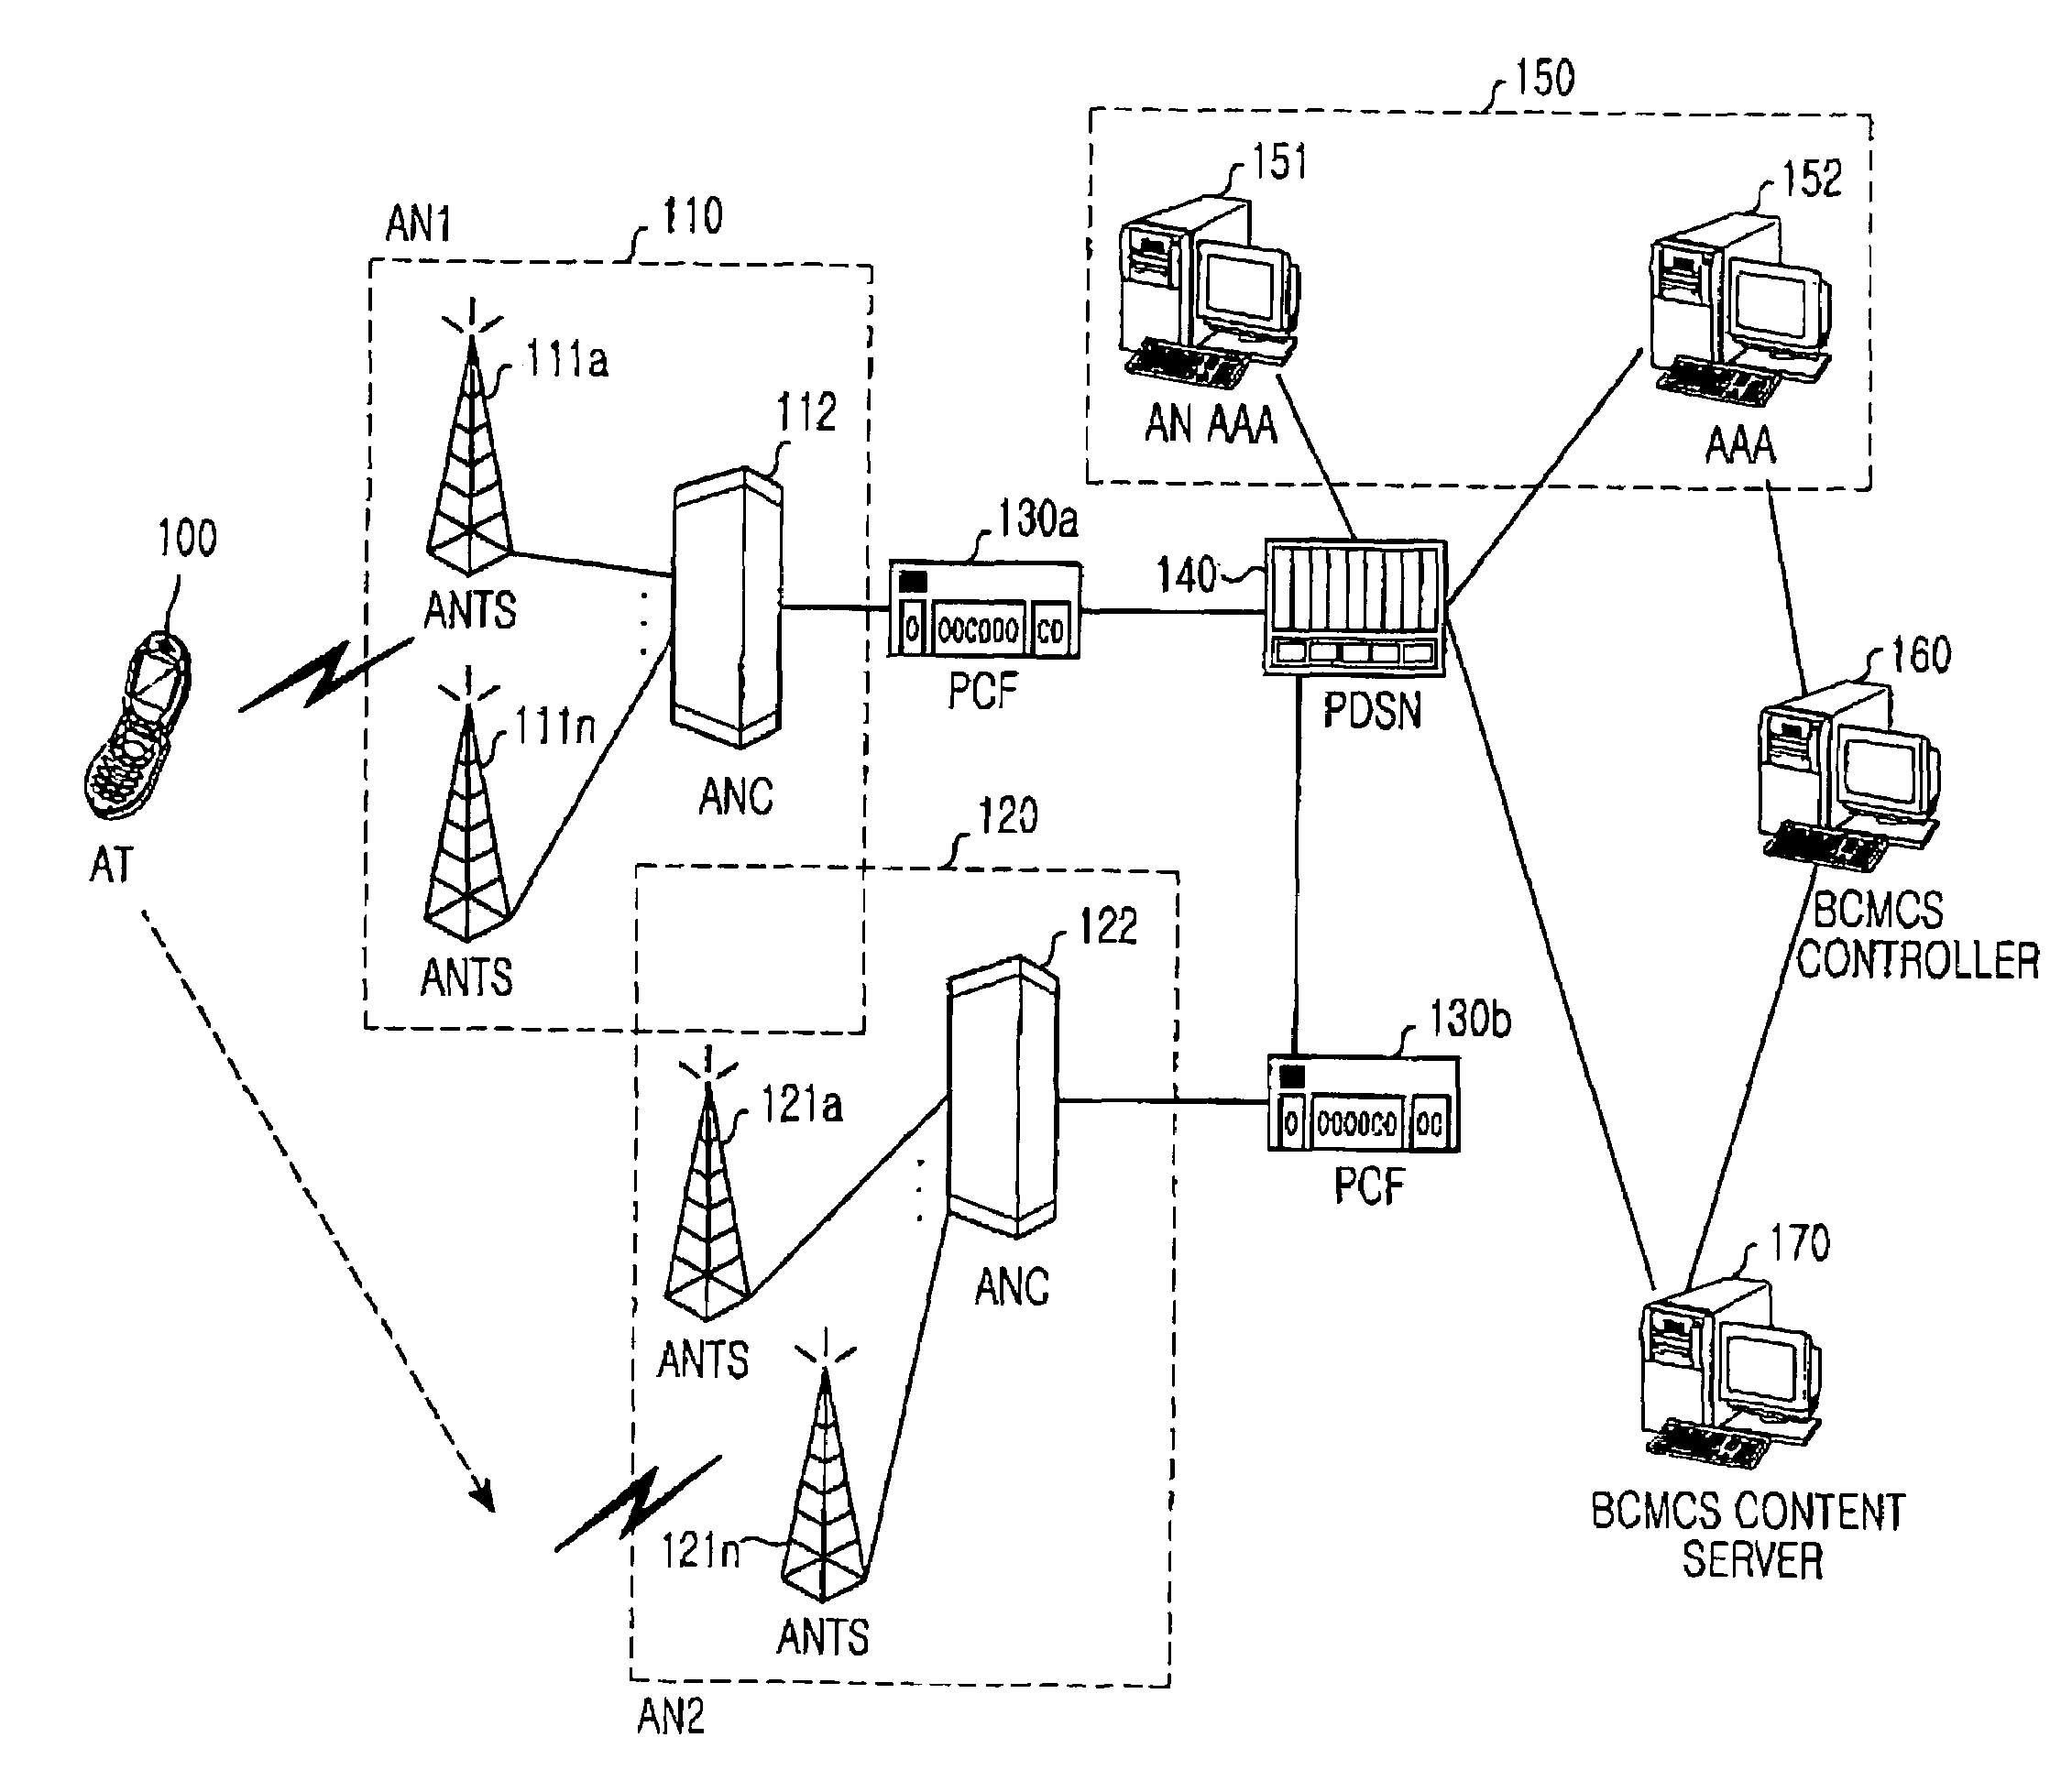 System and method for synchronizing broadcast/multicast service content frames in a mobile communication system